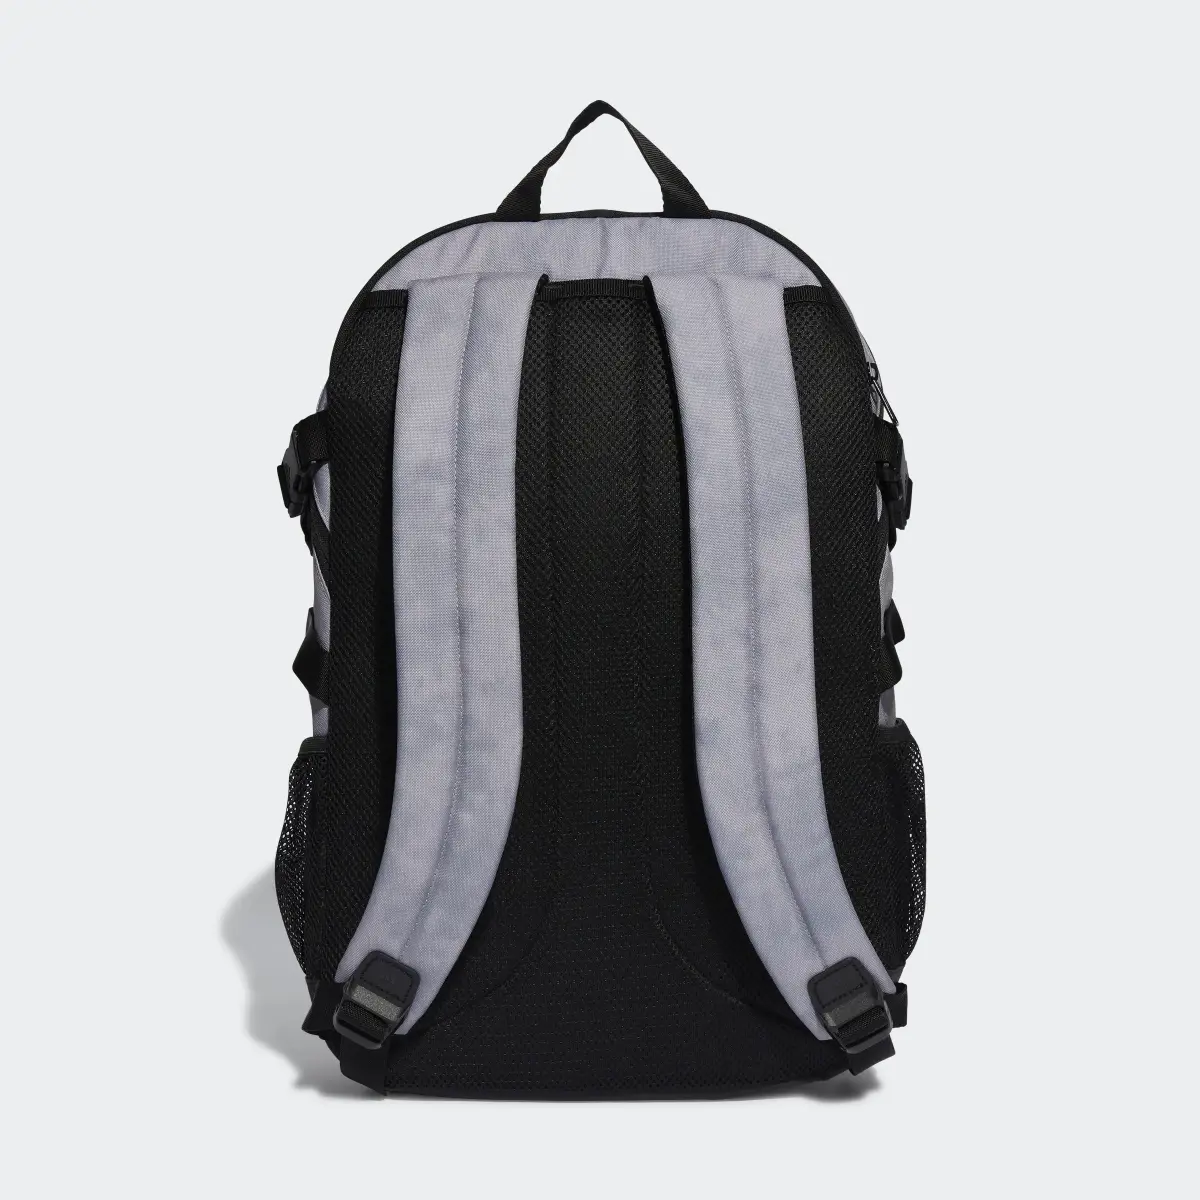 Adidas Power 6 Graphic Backpack. 3